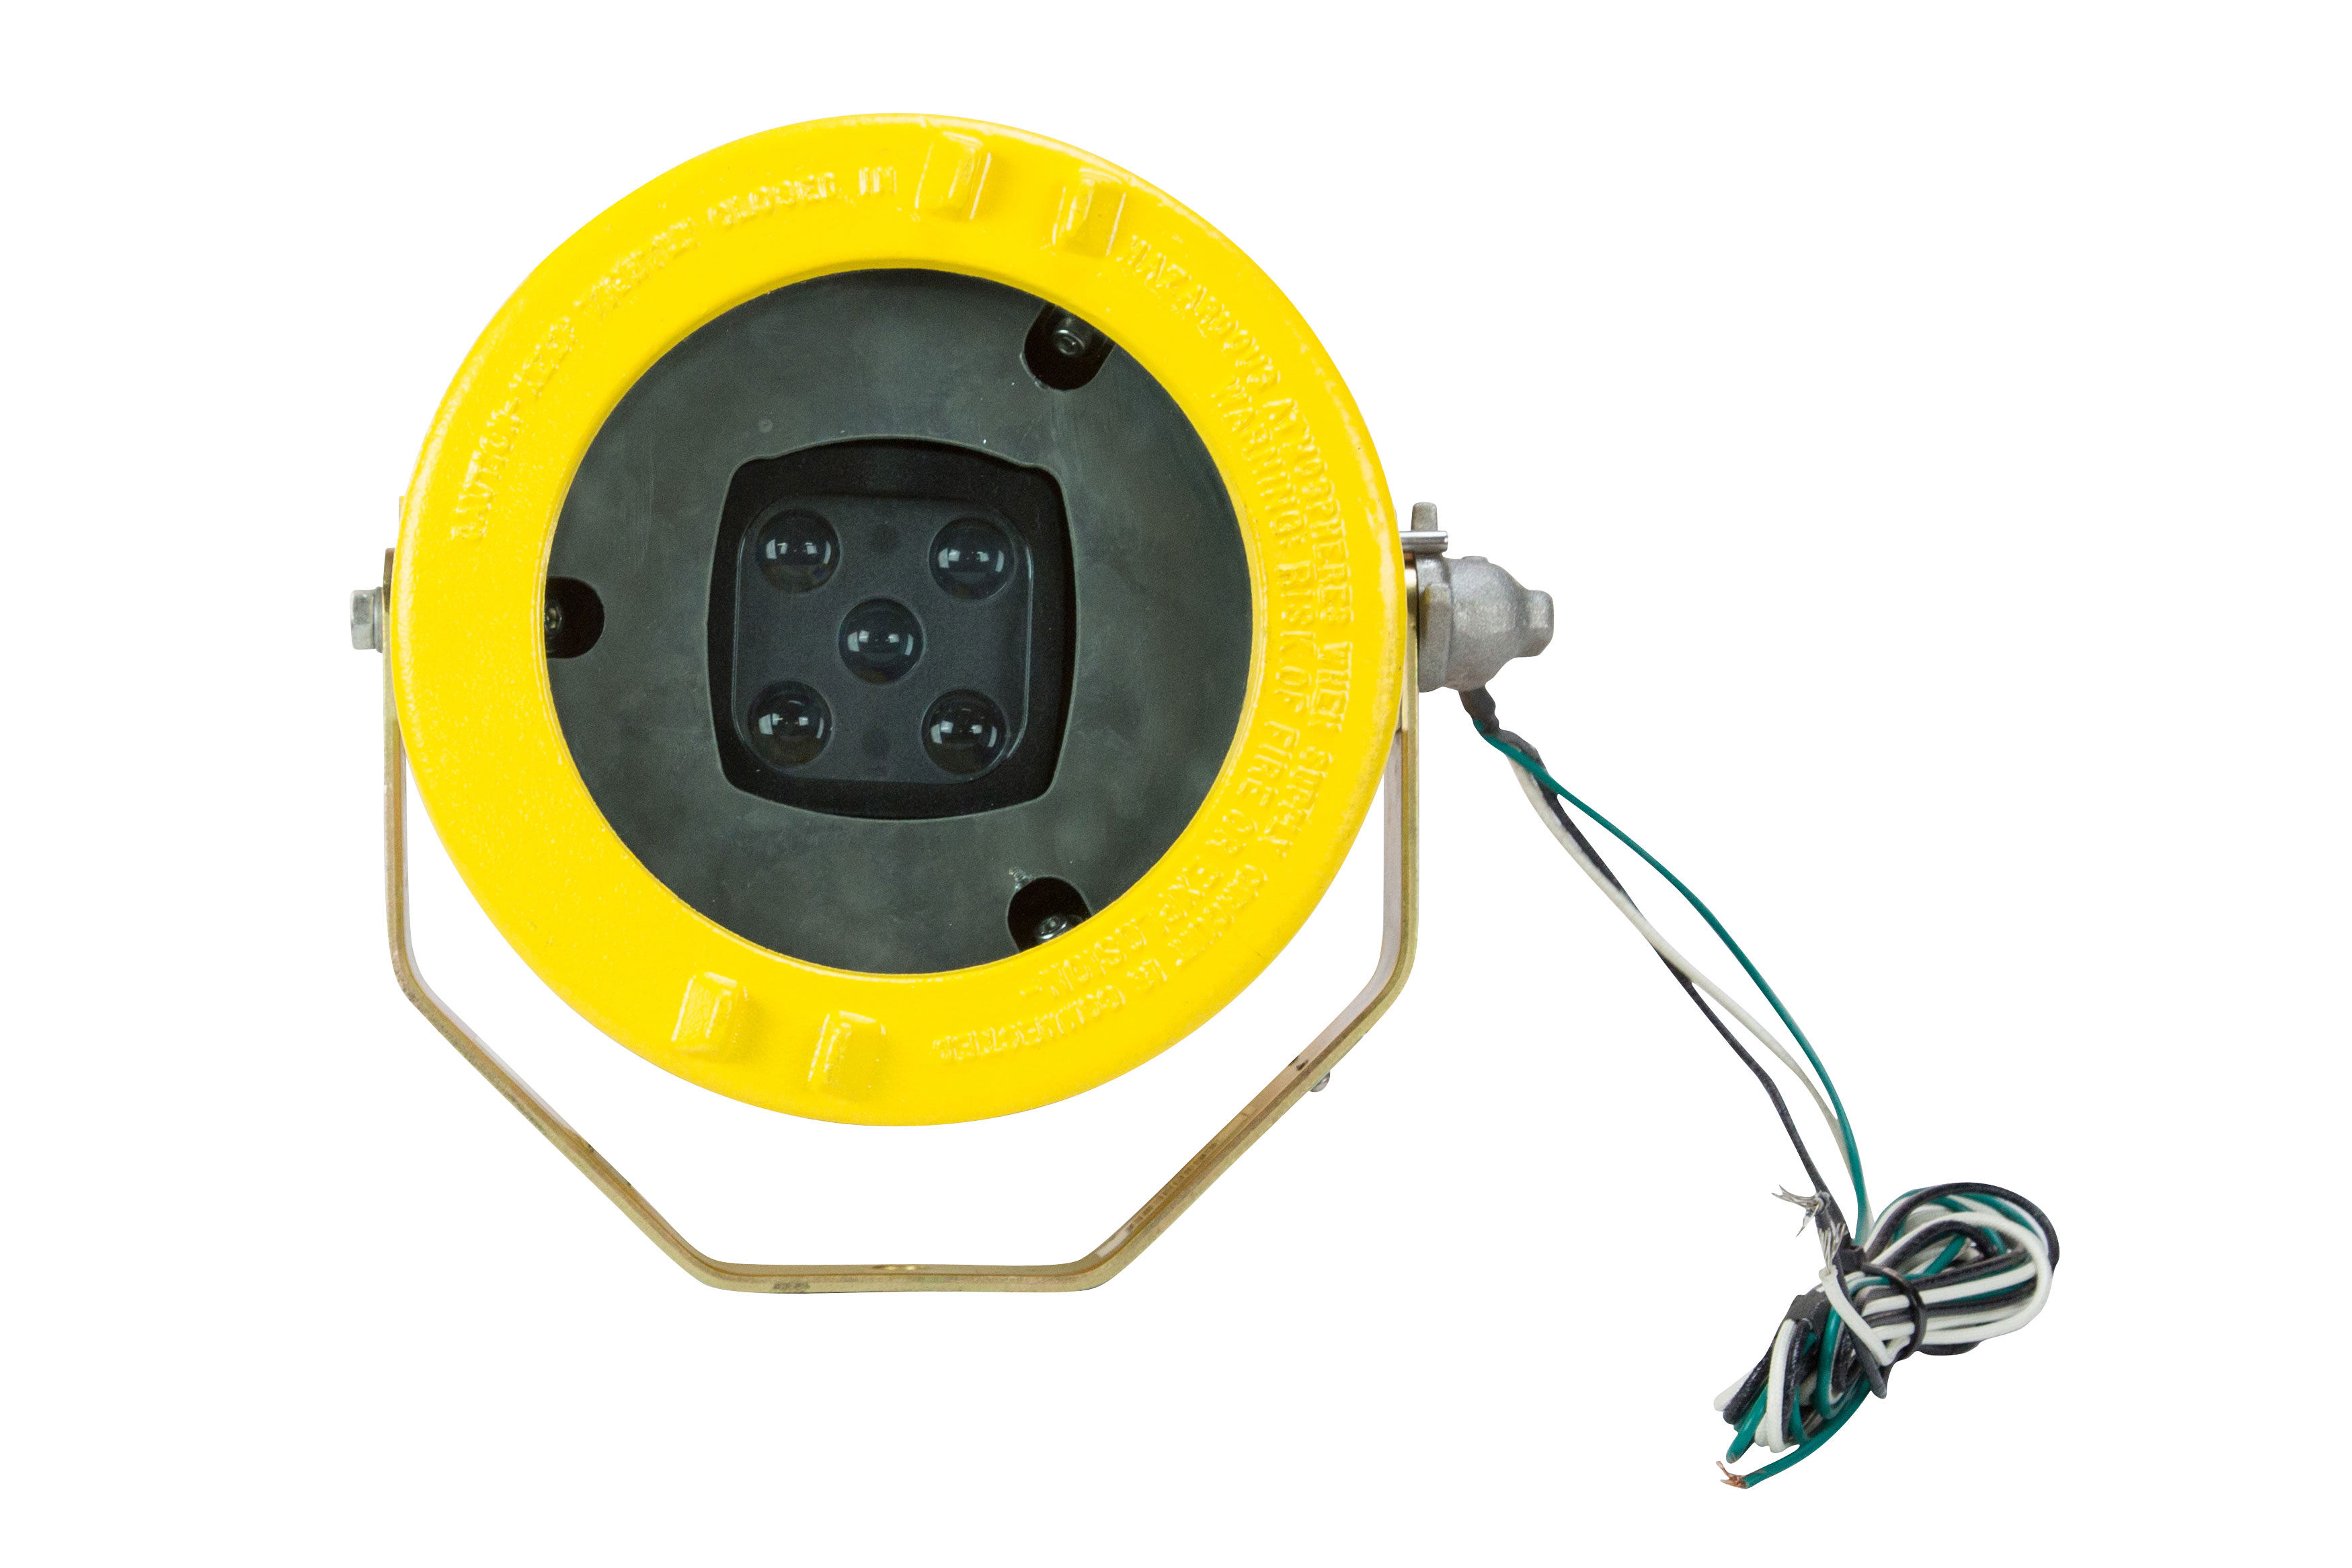 Class 1 Division 1 Red LED Forklift Warning Light